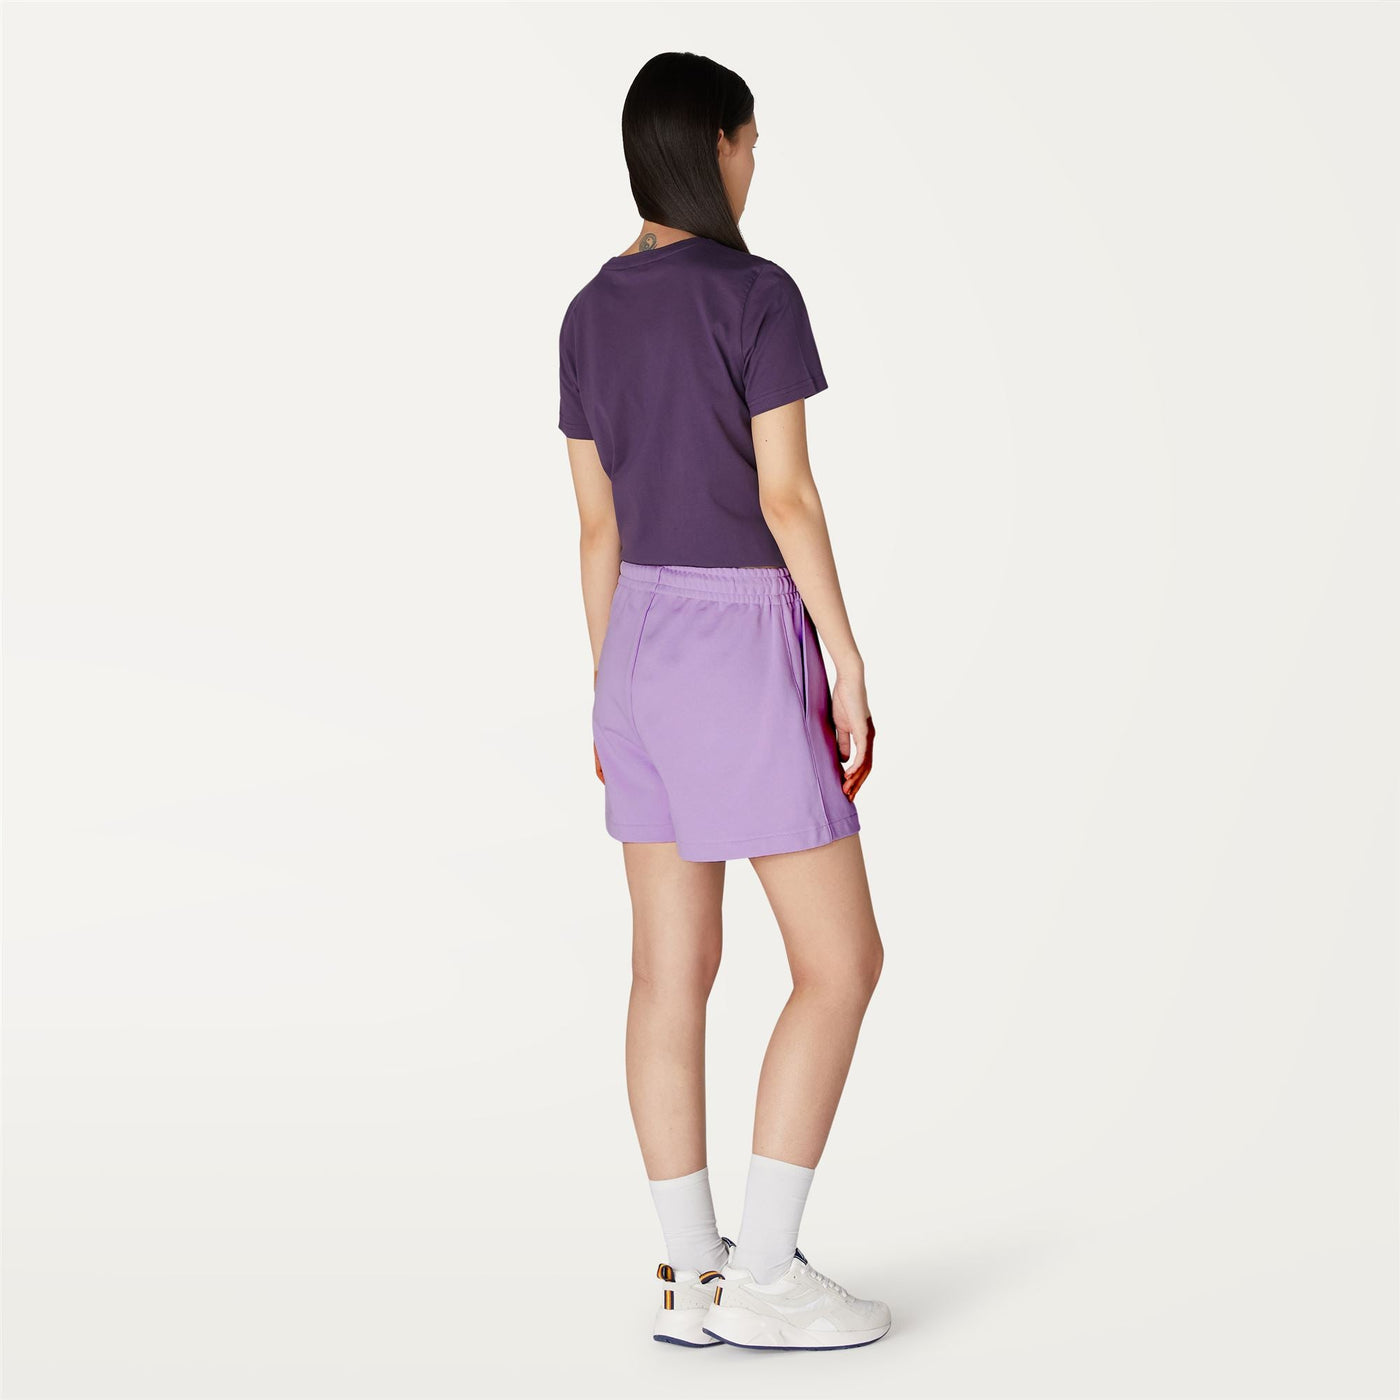 Shorts Woman CATE Sport  Shorts Violet Peonia | K-Way Dressed Front Double